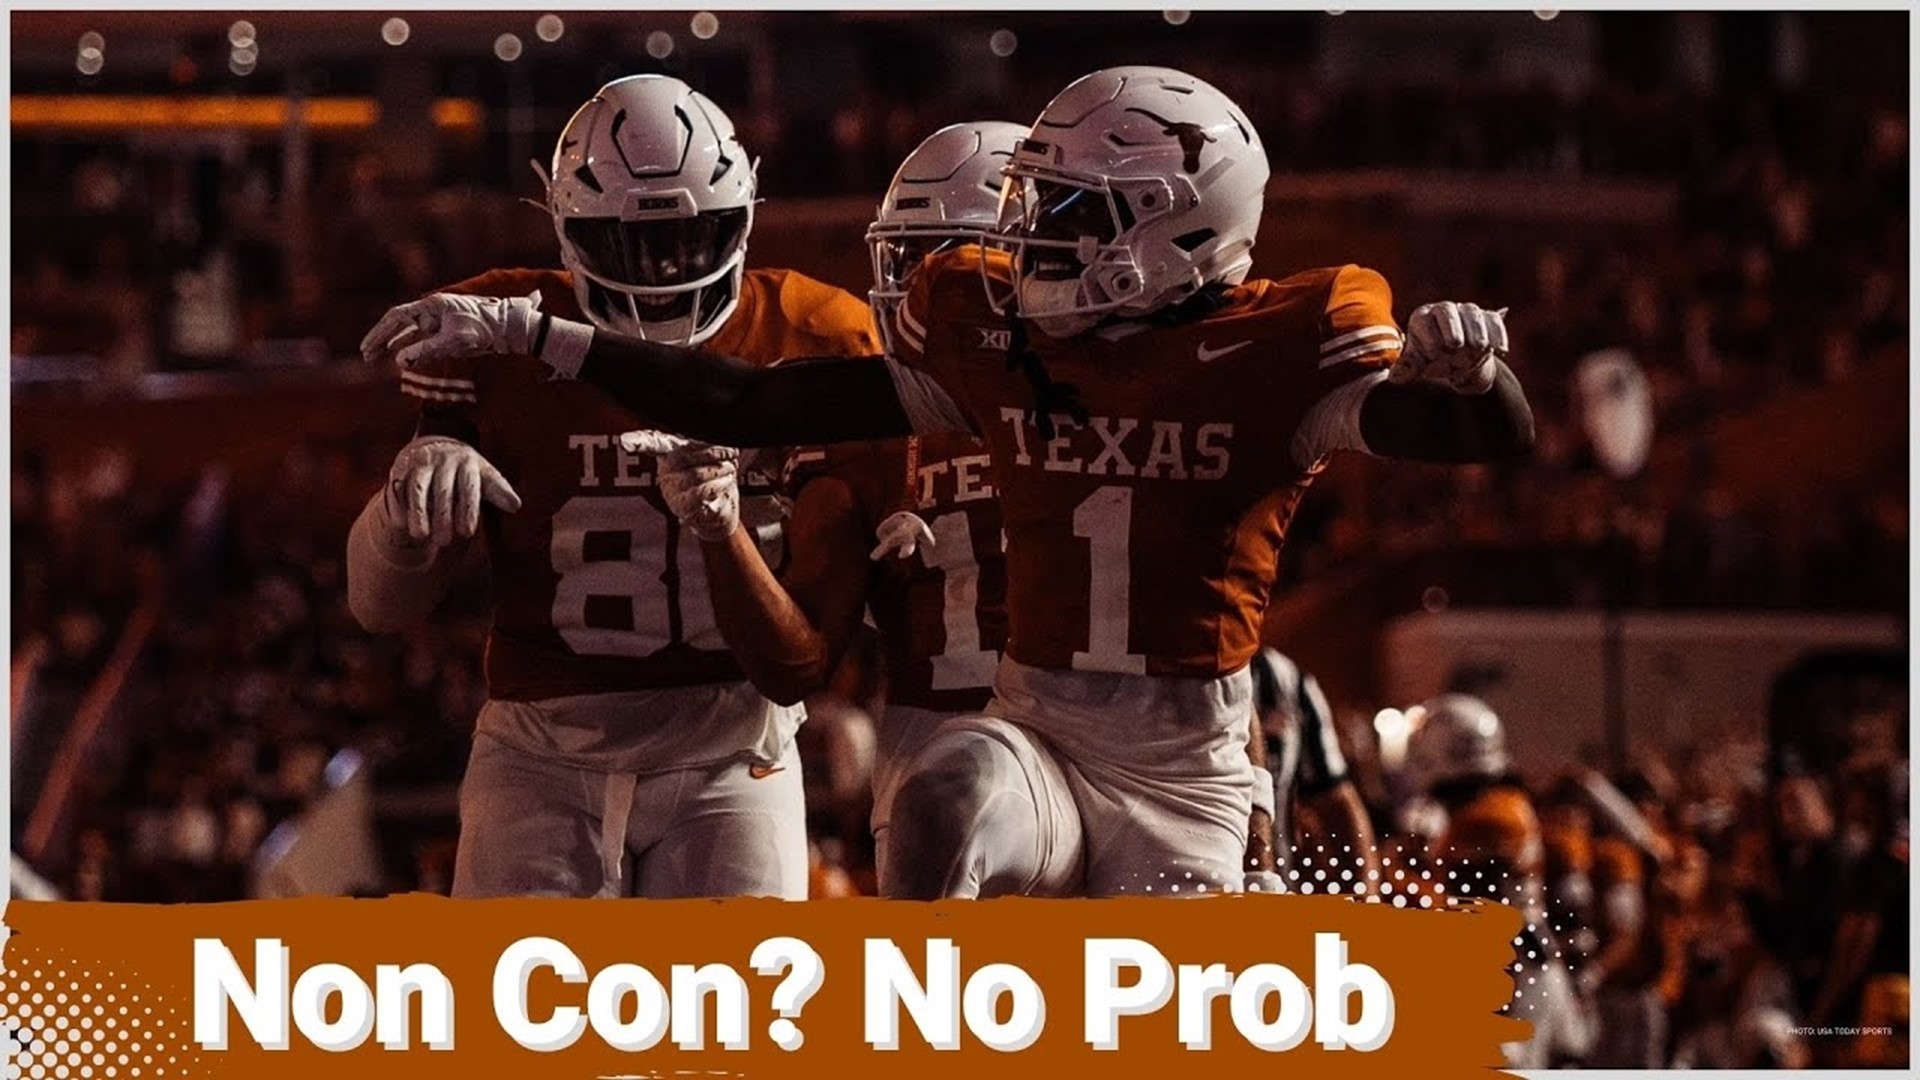 Texas came out slow after one of their biggest wins in a decade over Alabama and went into the fourth quarter tied with a Wyoming team